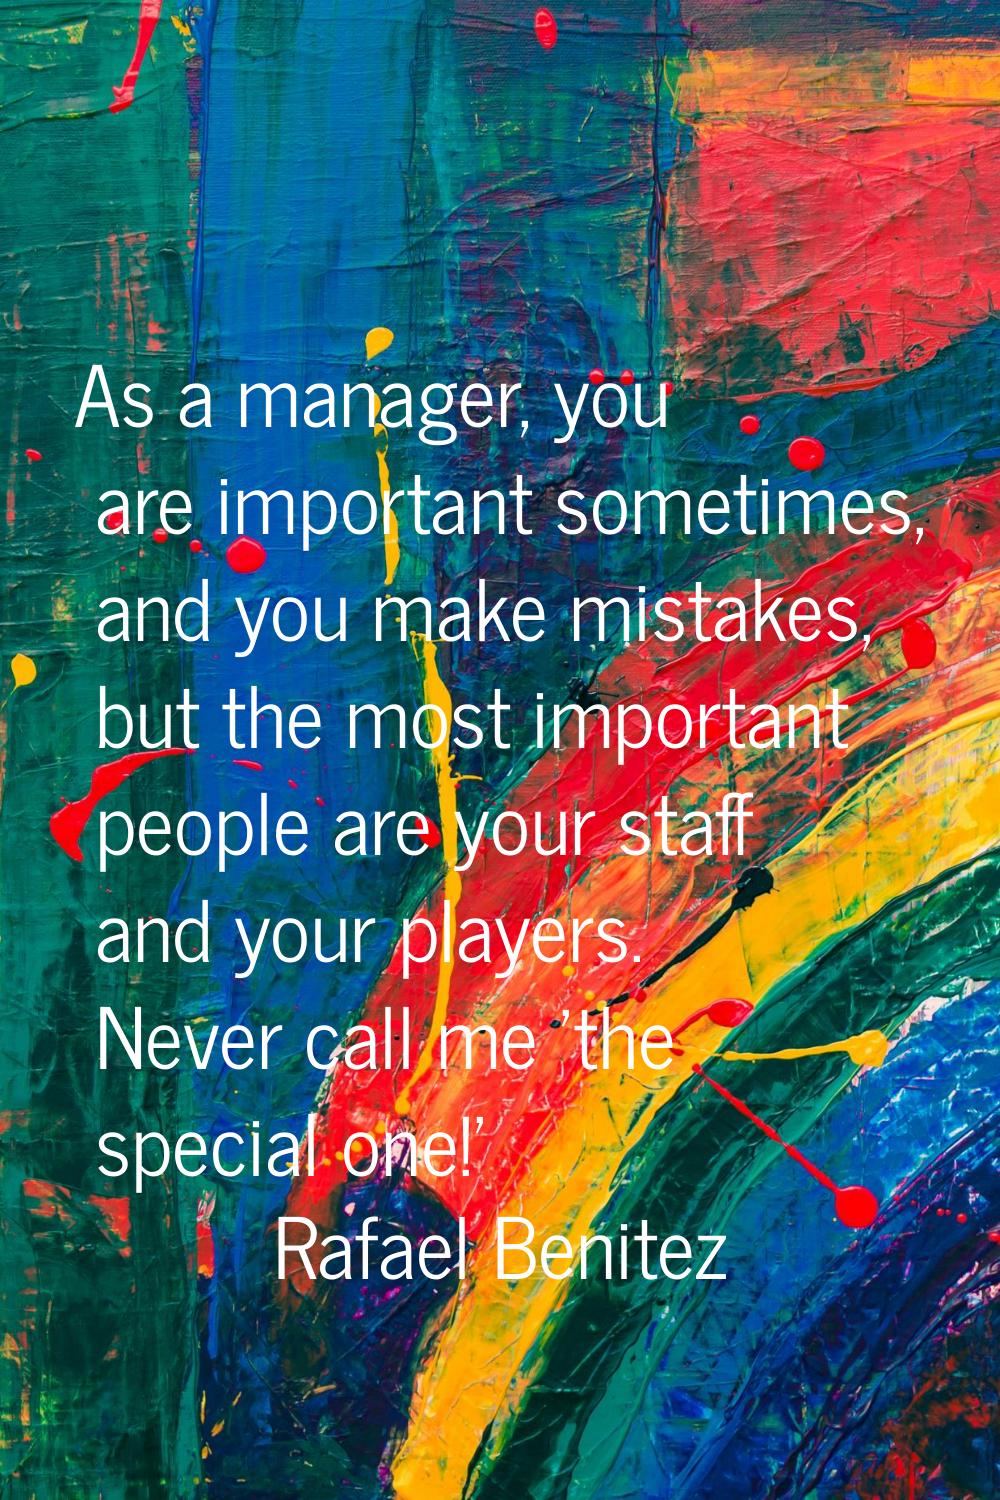 As a manager, you are important sometimes, and you make mistakes, but the most important people are